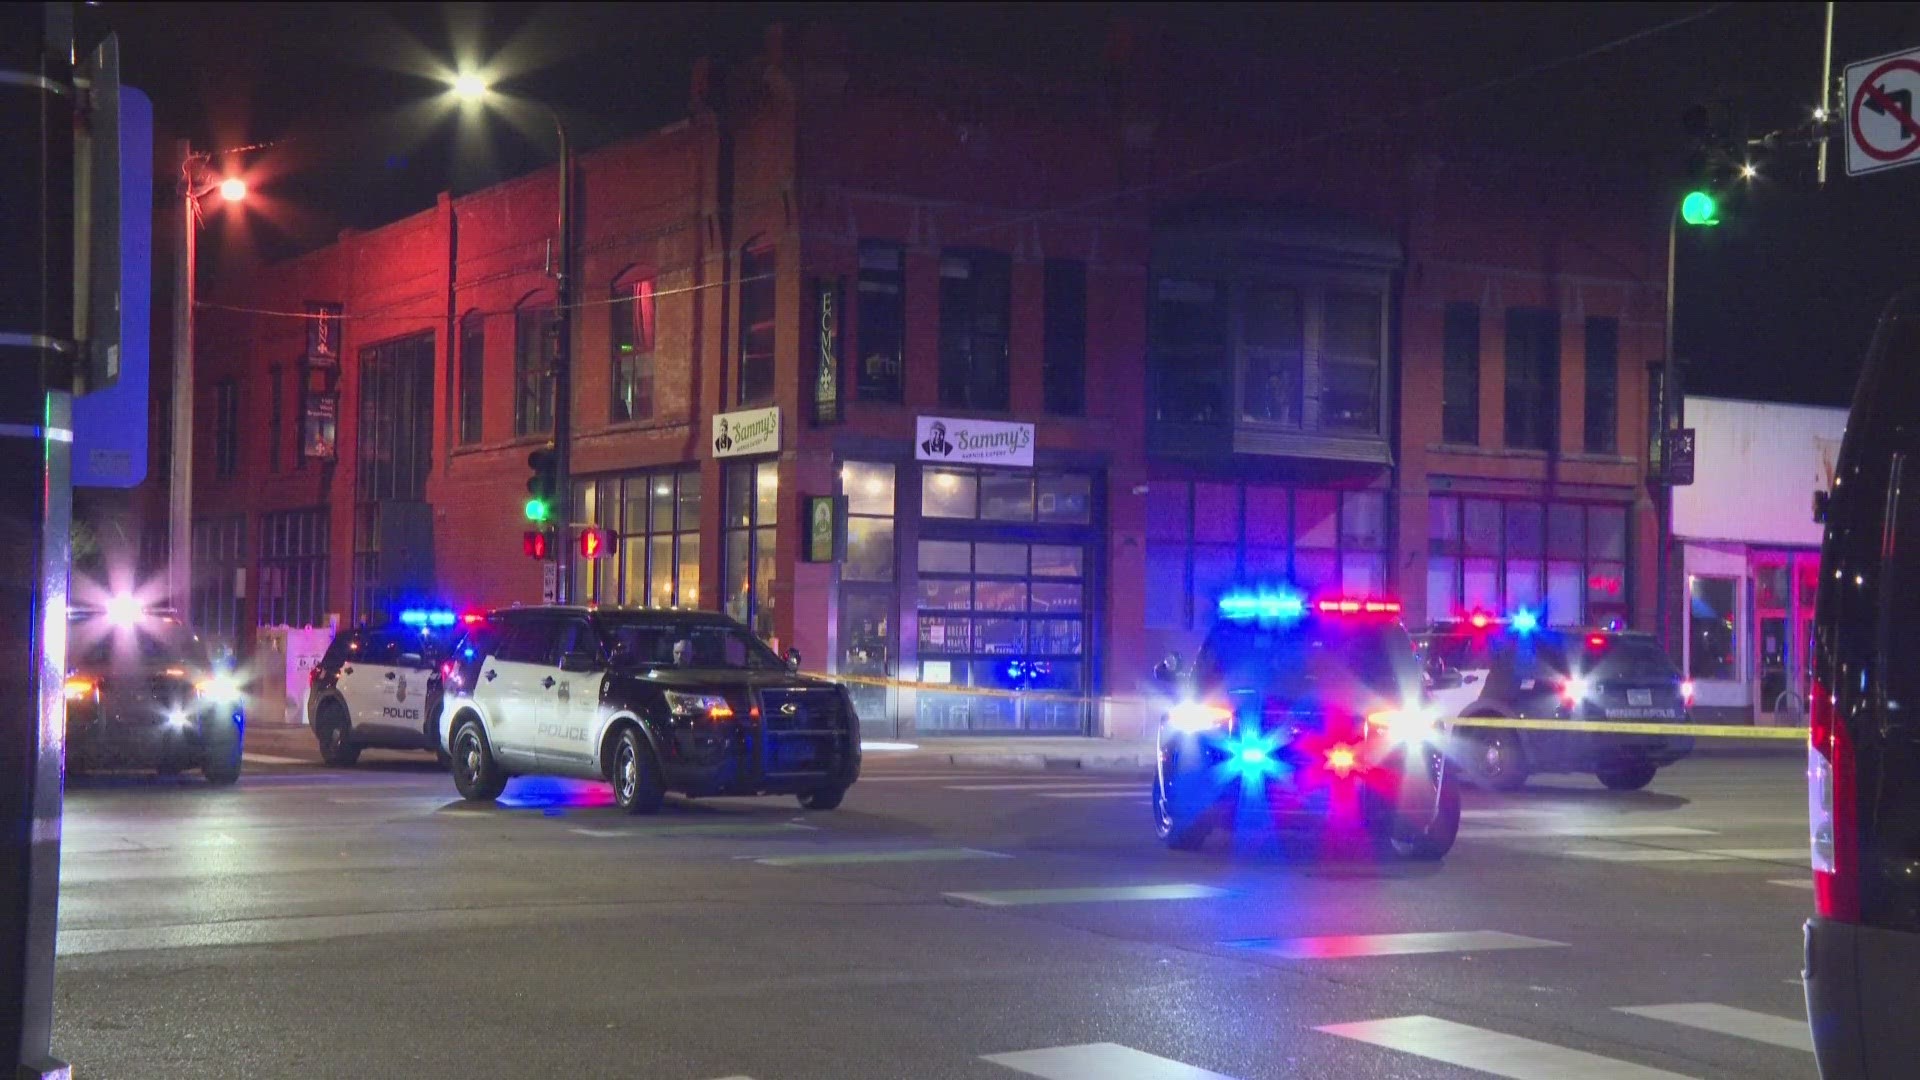 The shooting occurred just after 1 a.m. Wednesday at the intersection of West Broadway and North Emerson Avenue.